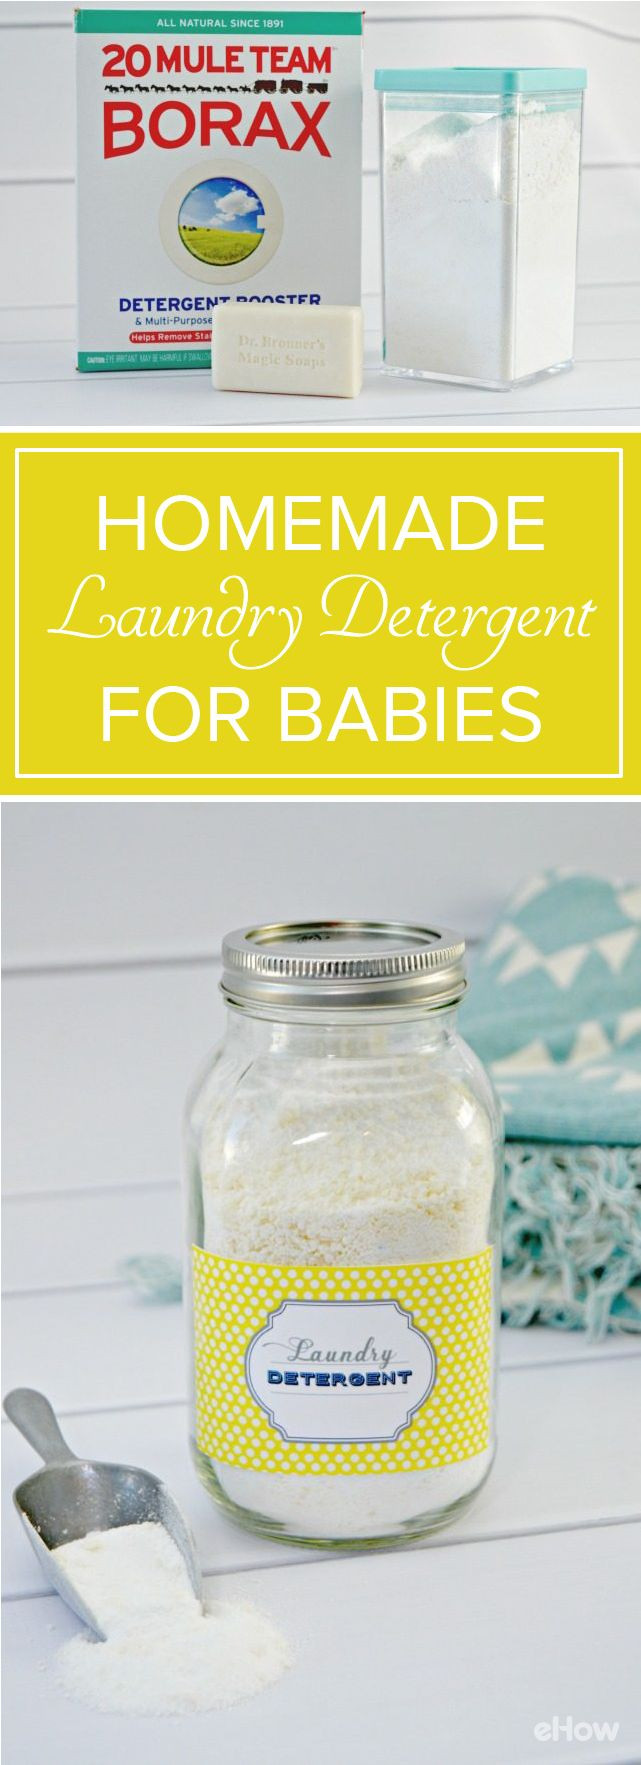 Diy Baby Laundry Detergent
 Babies have sensitive skin and require mild laundry